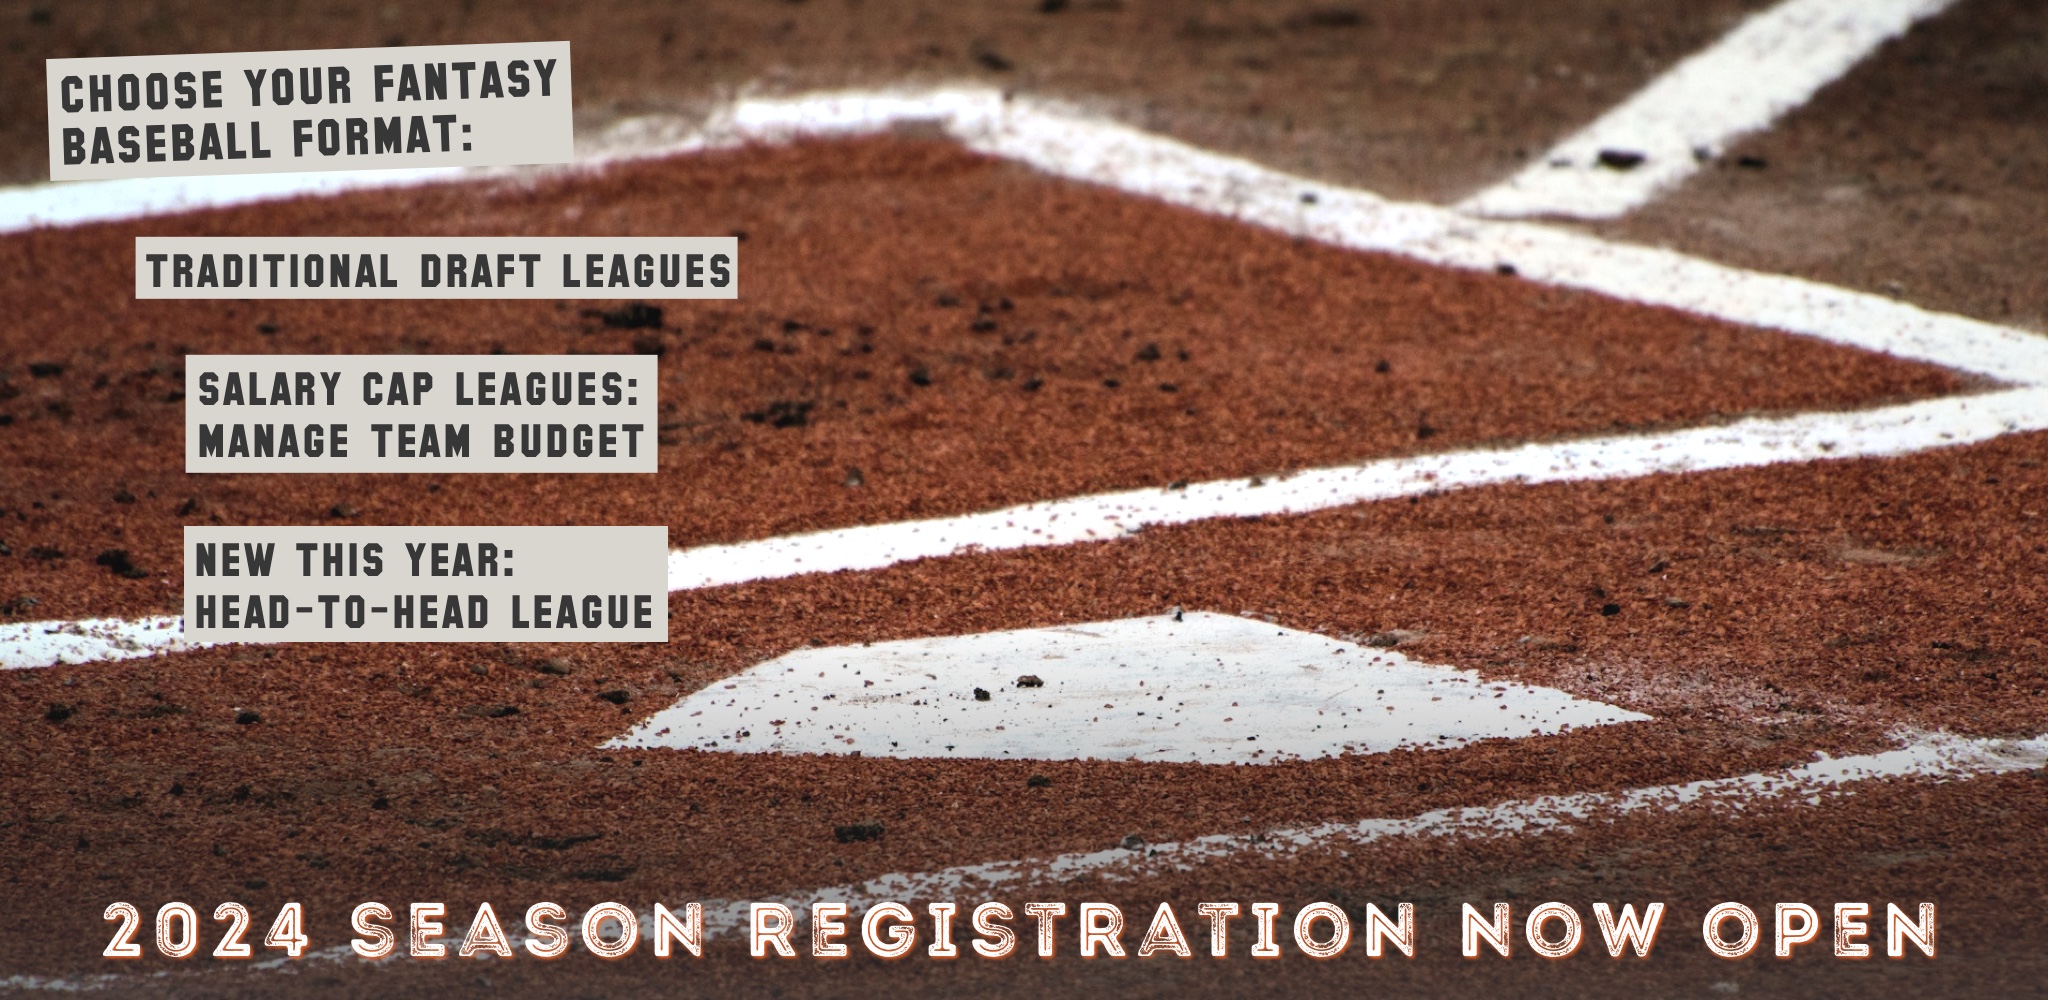 Promo graphic of baseball home plate in dirt infield, advertising 2024 season registration is open